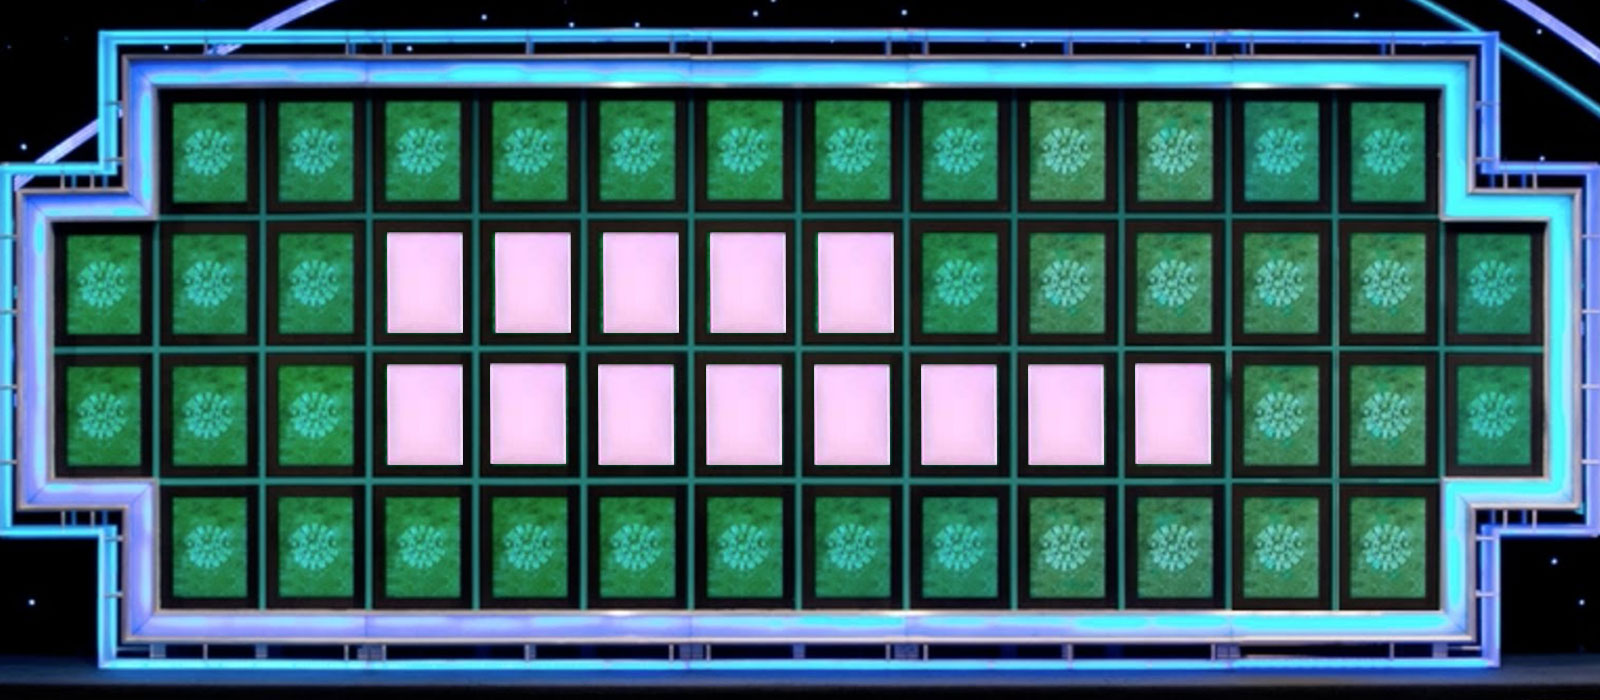 Can You Solve These Wheel of Fortune Puzzles? Quiz 815